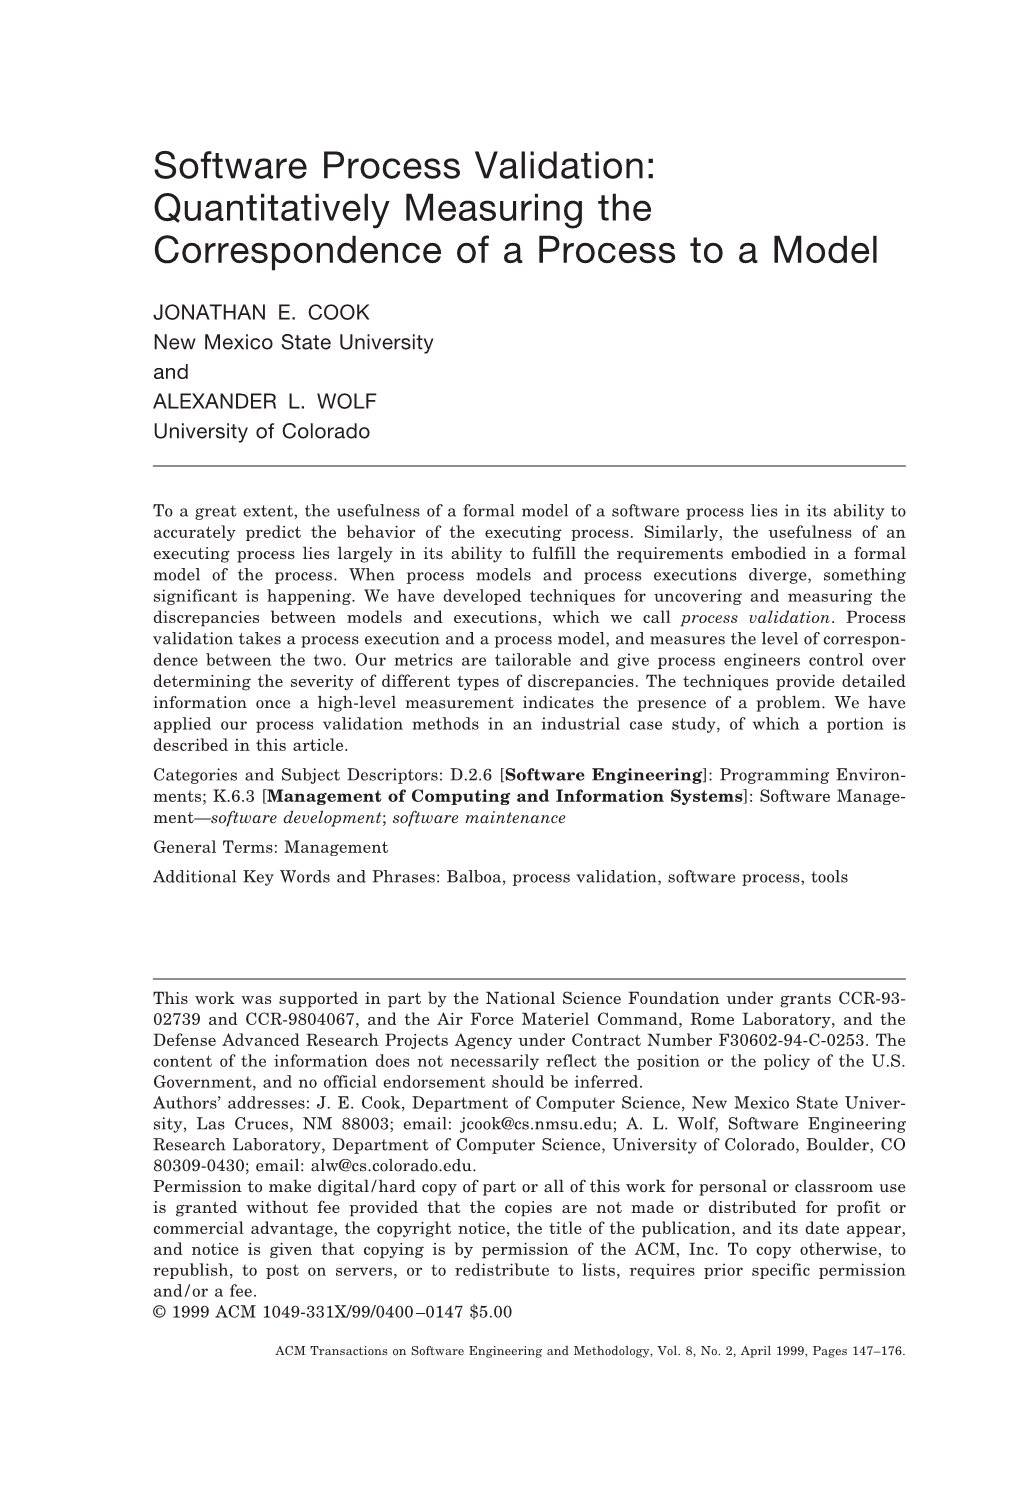 Software Process Validation: Quantitatively Measuring the Correspondence of a Process to a Model